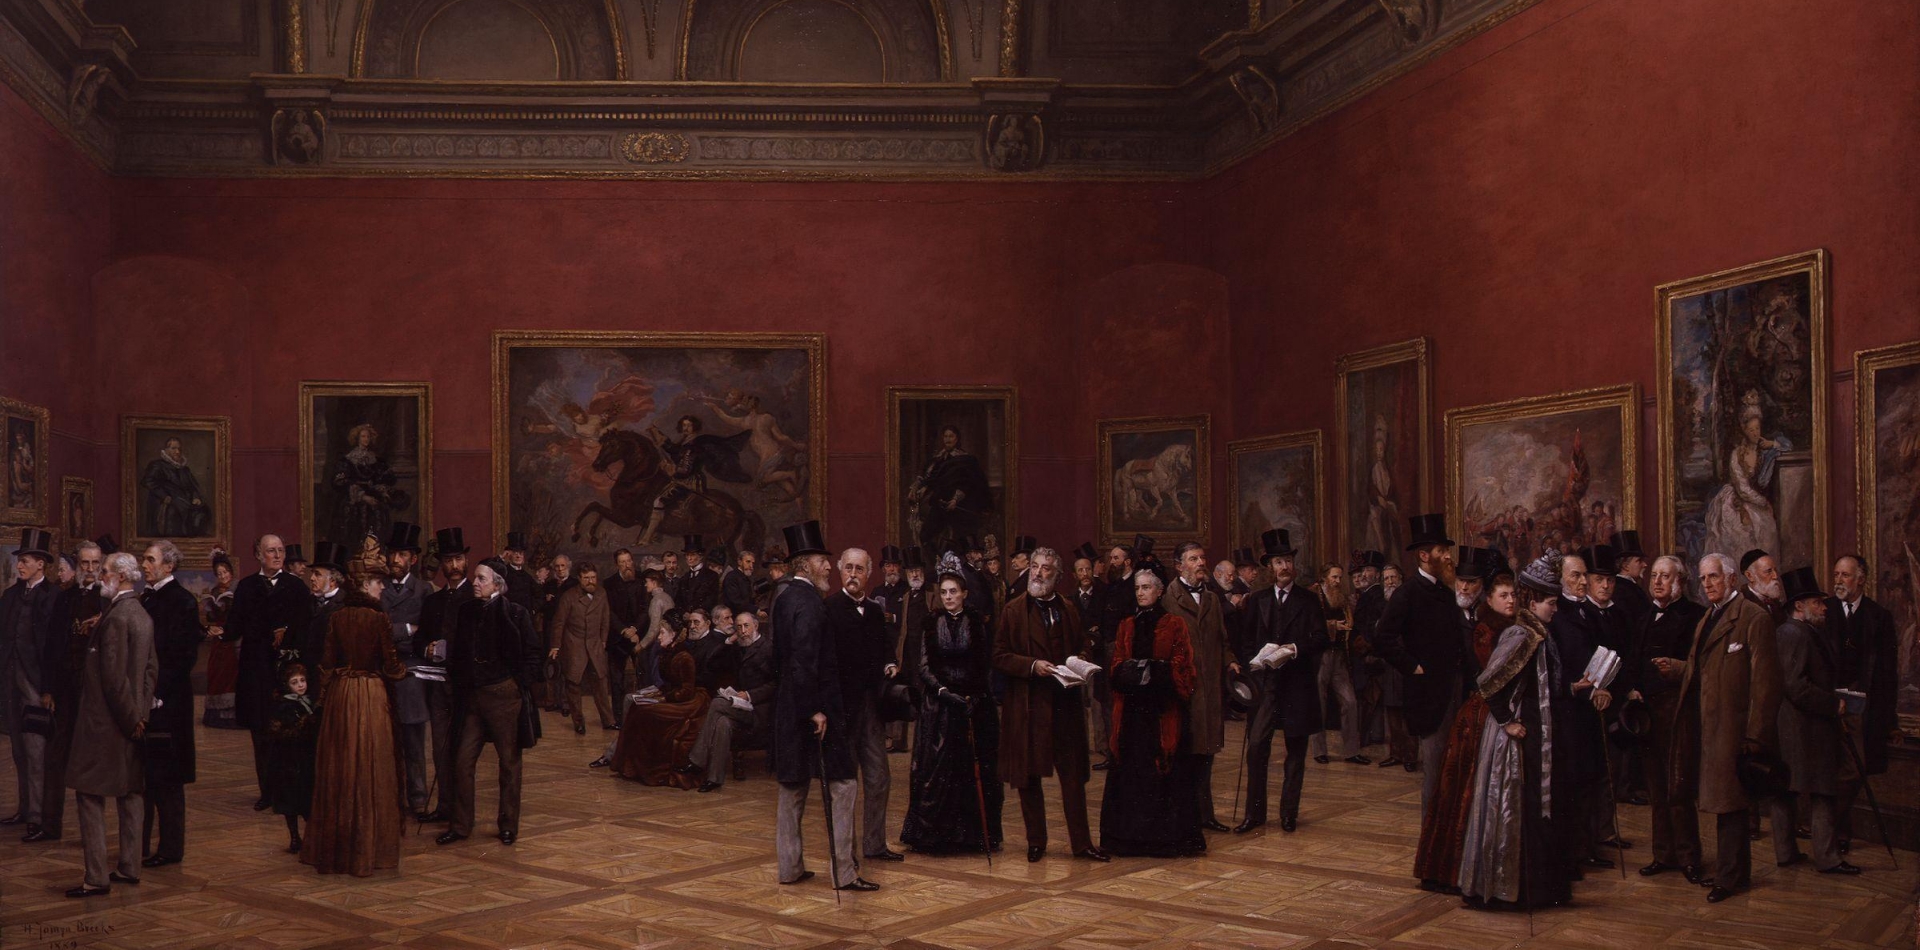 A group of men and women in formal attire engage in conversation while admiring large paintings hung on the red walls of an exhibition hall.